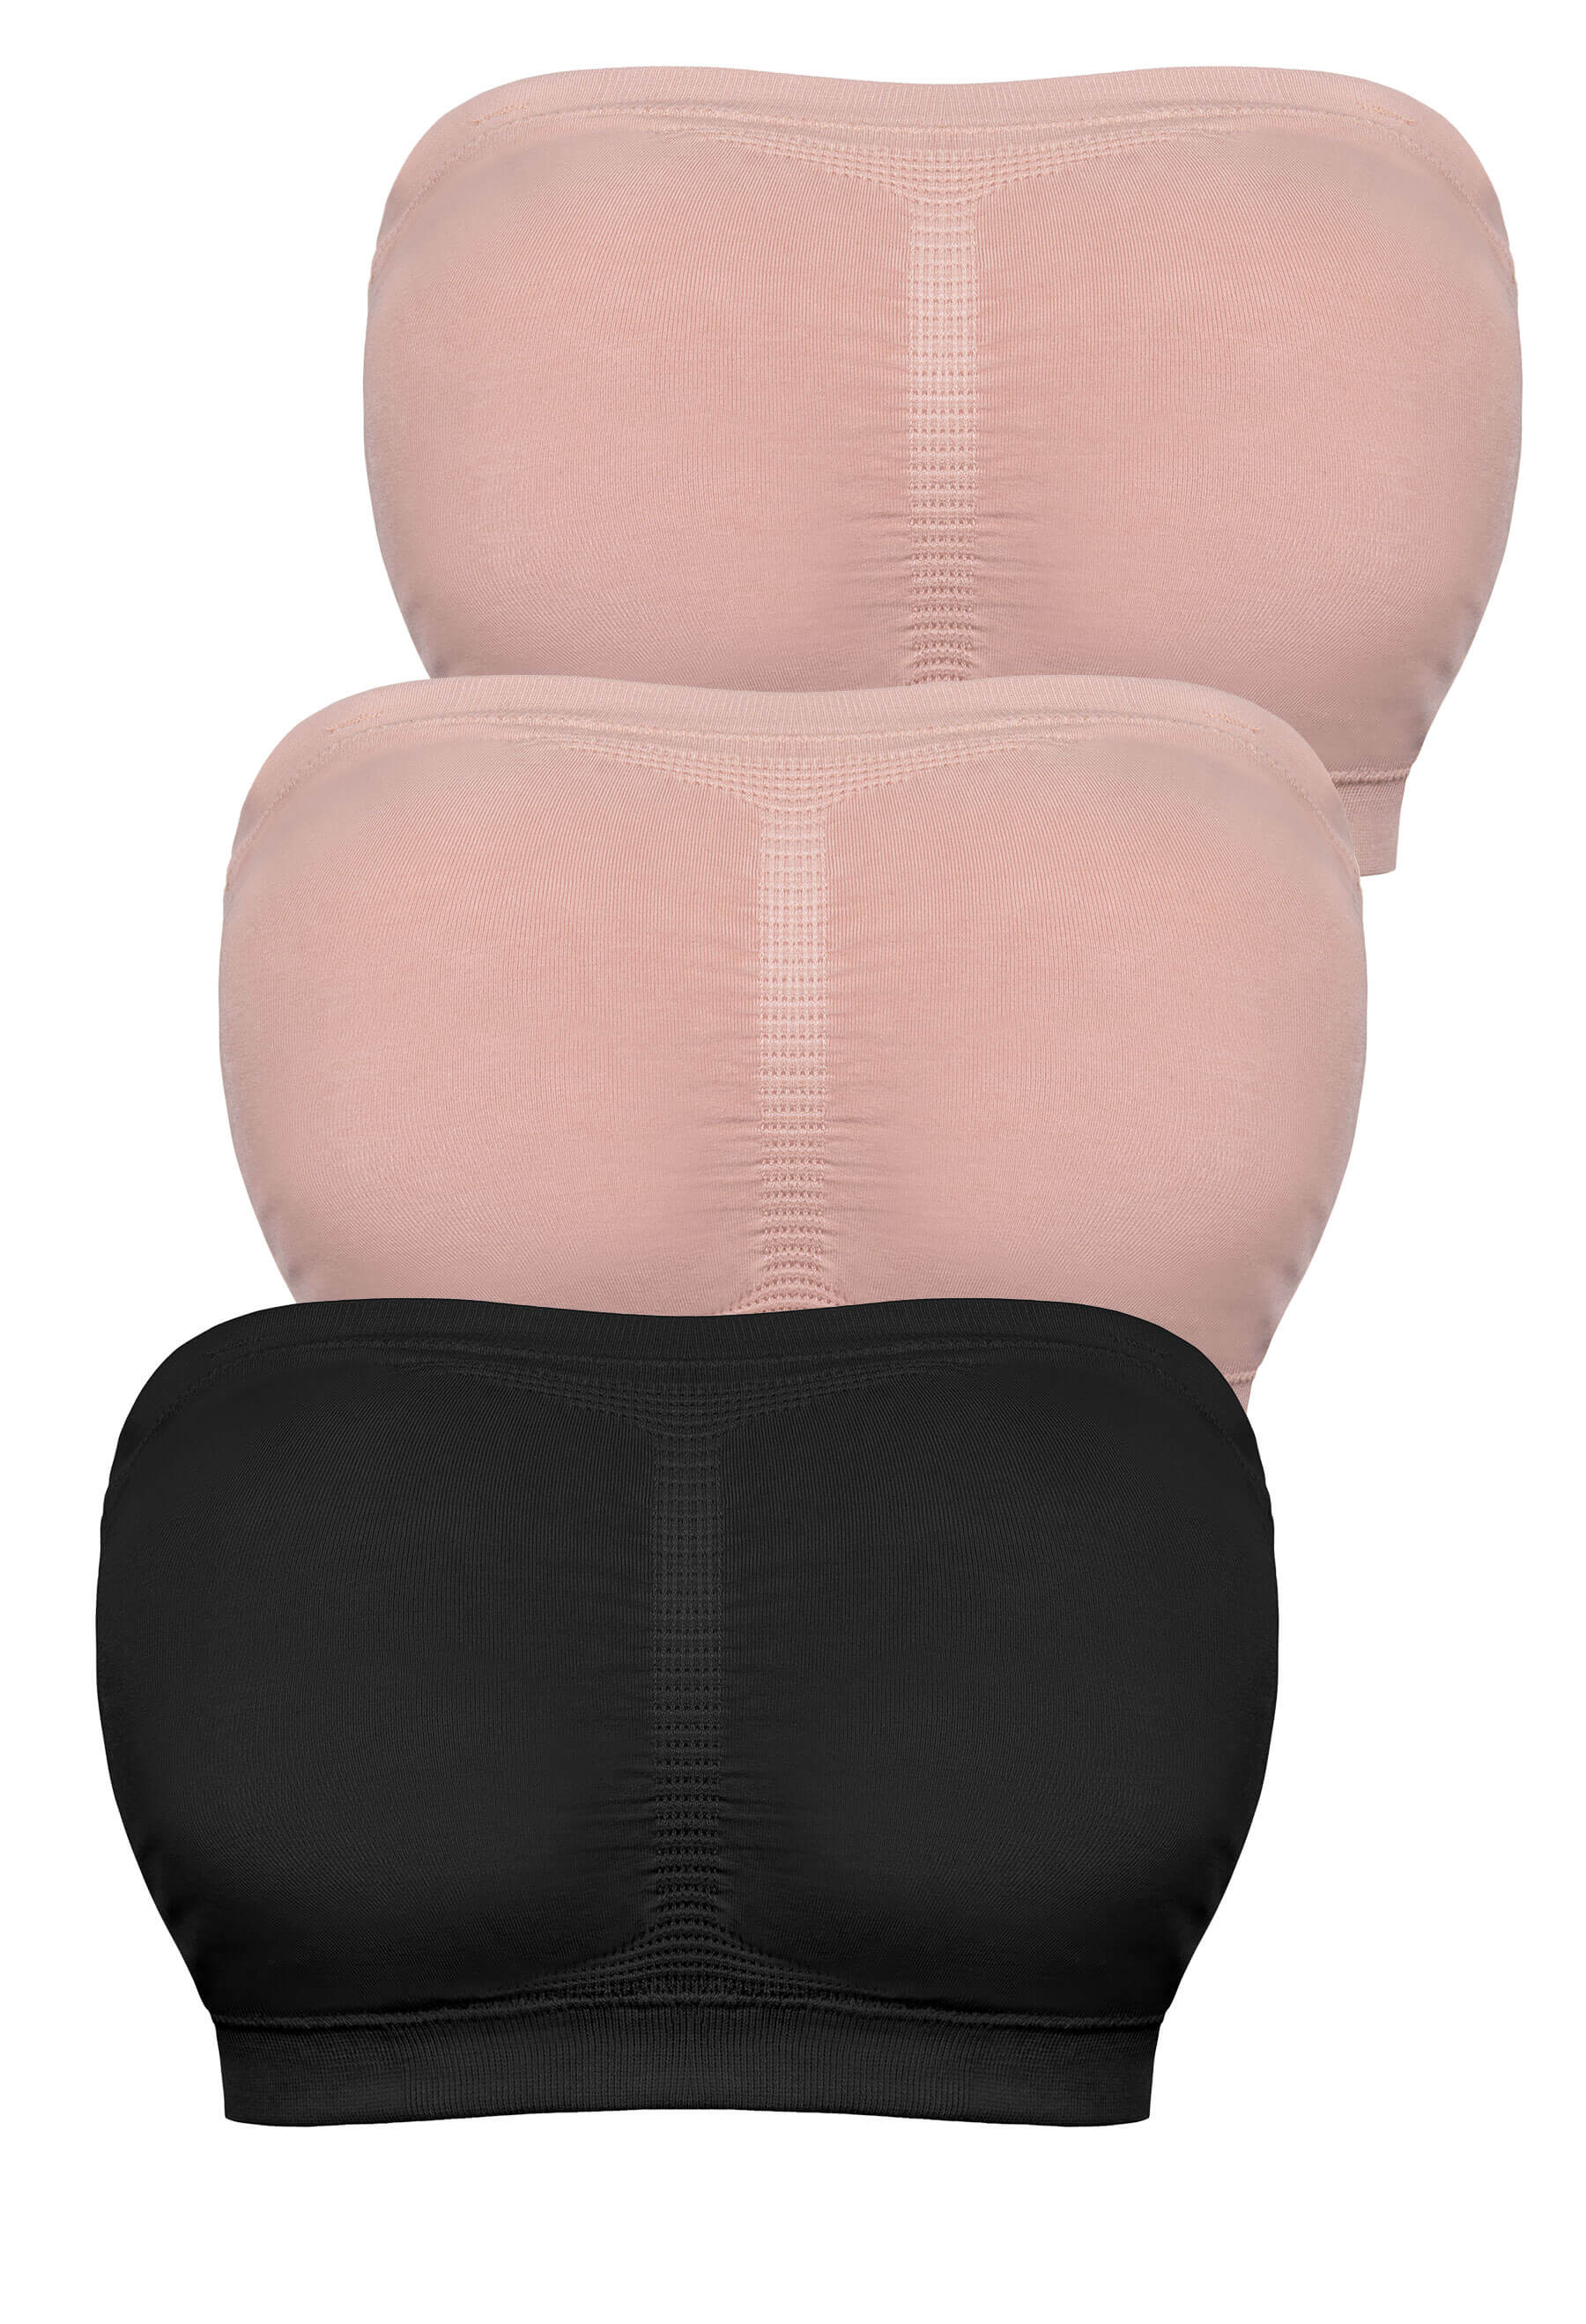 Buy DD+ Cotton Non Pad Minimise Bandeau Bra from Next